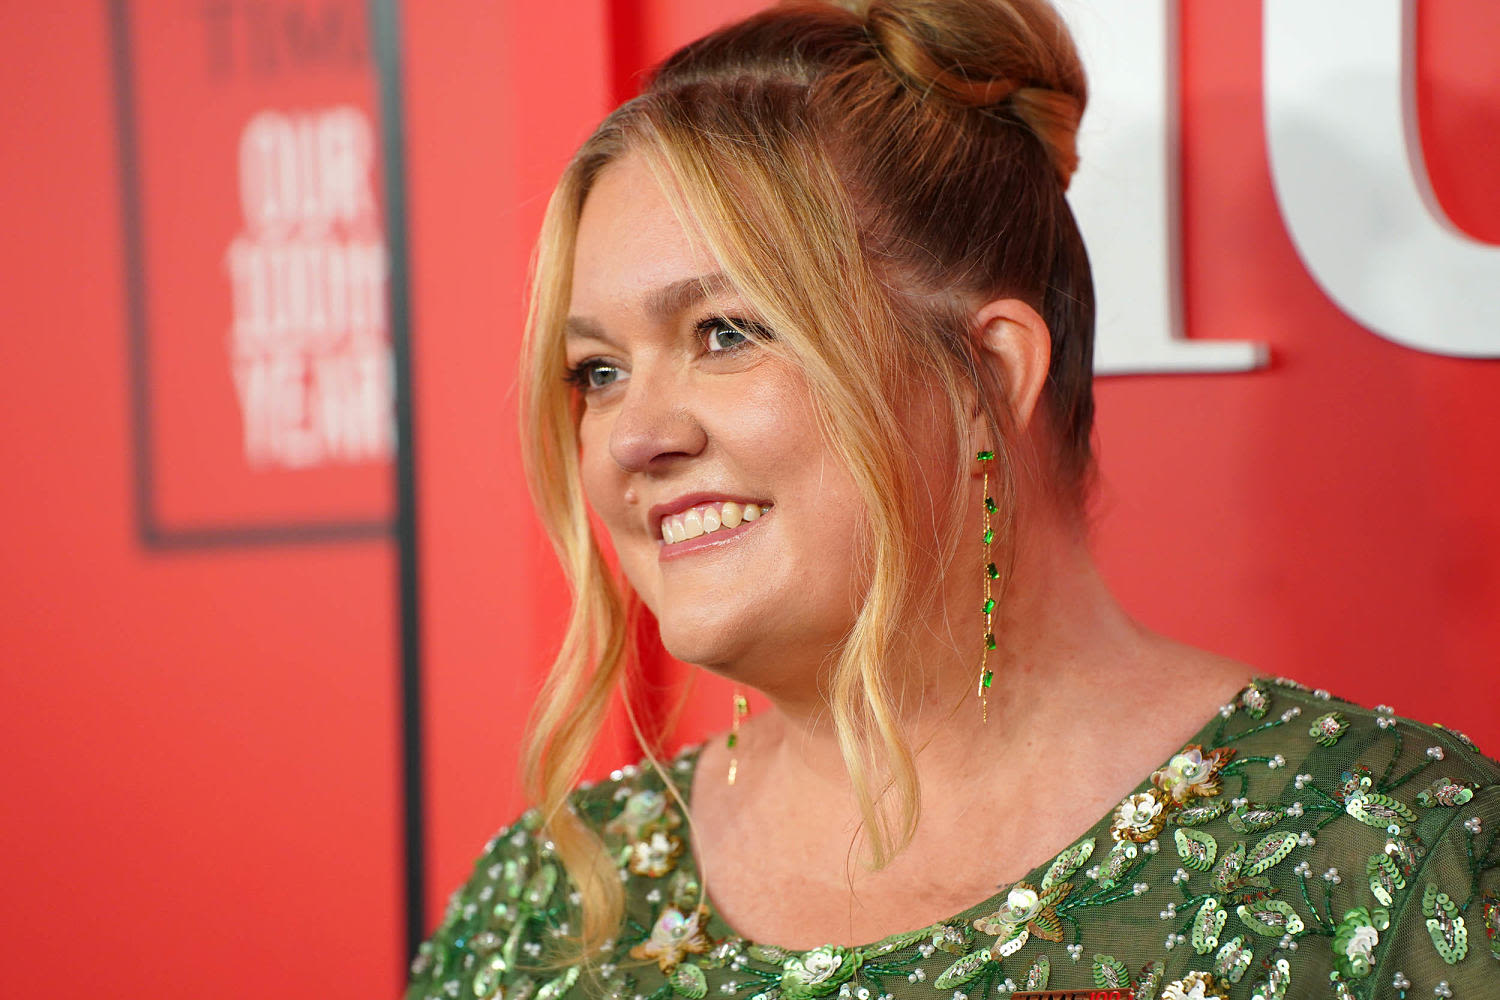 Colleen Hoover's bestselling book 'Verity' is becoming a movie. What to know